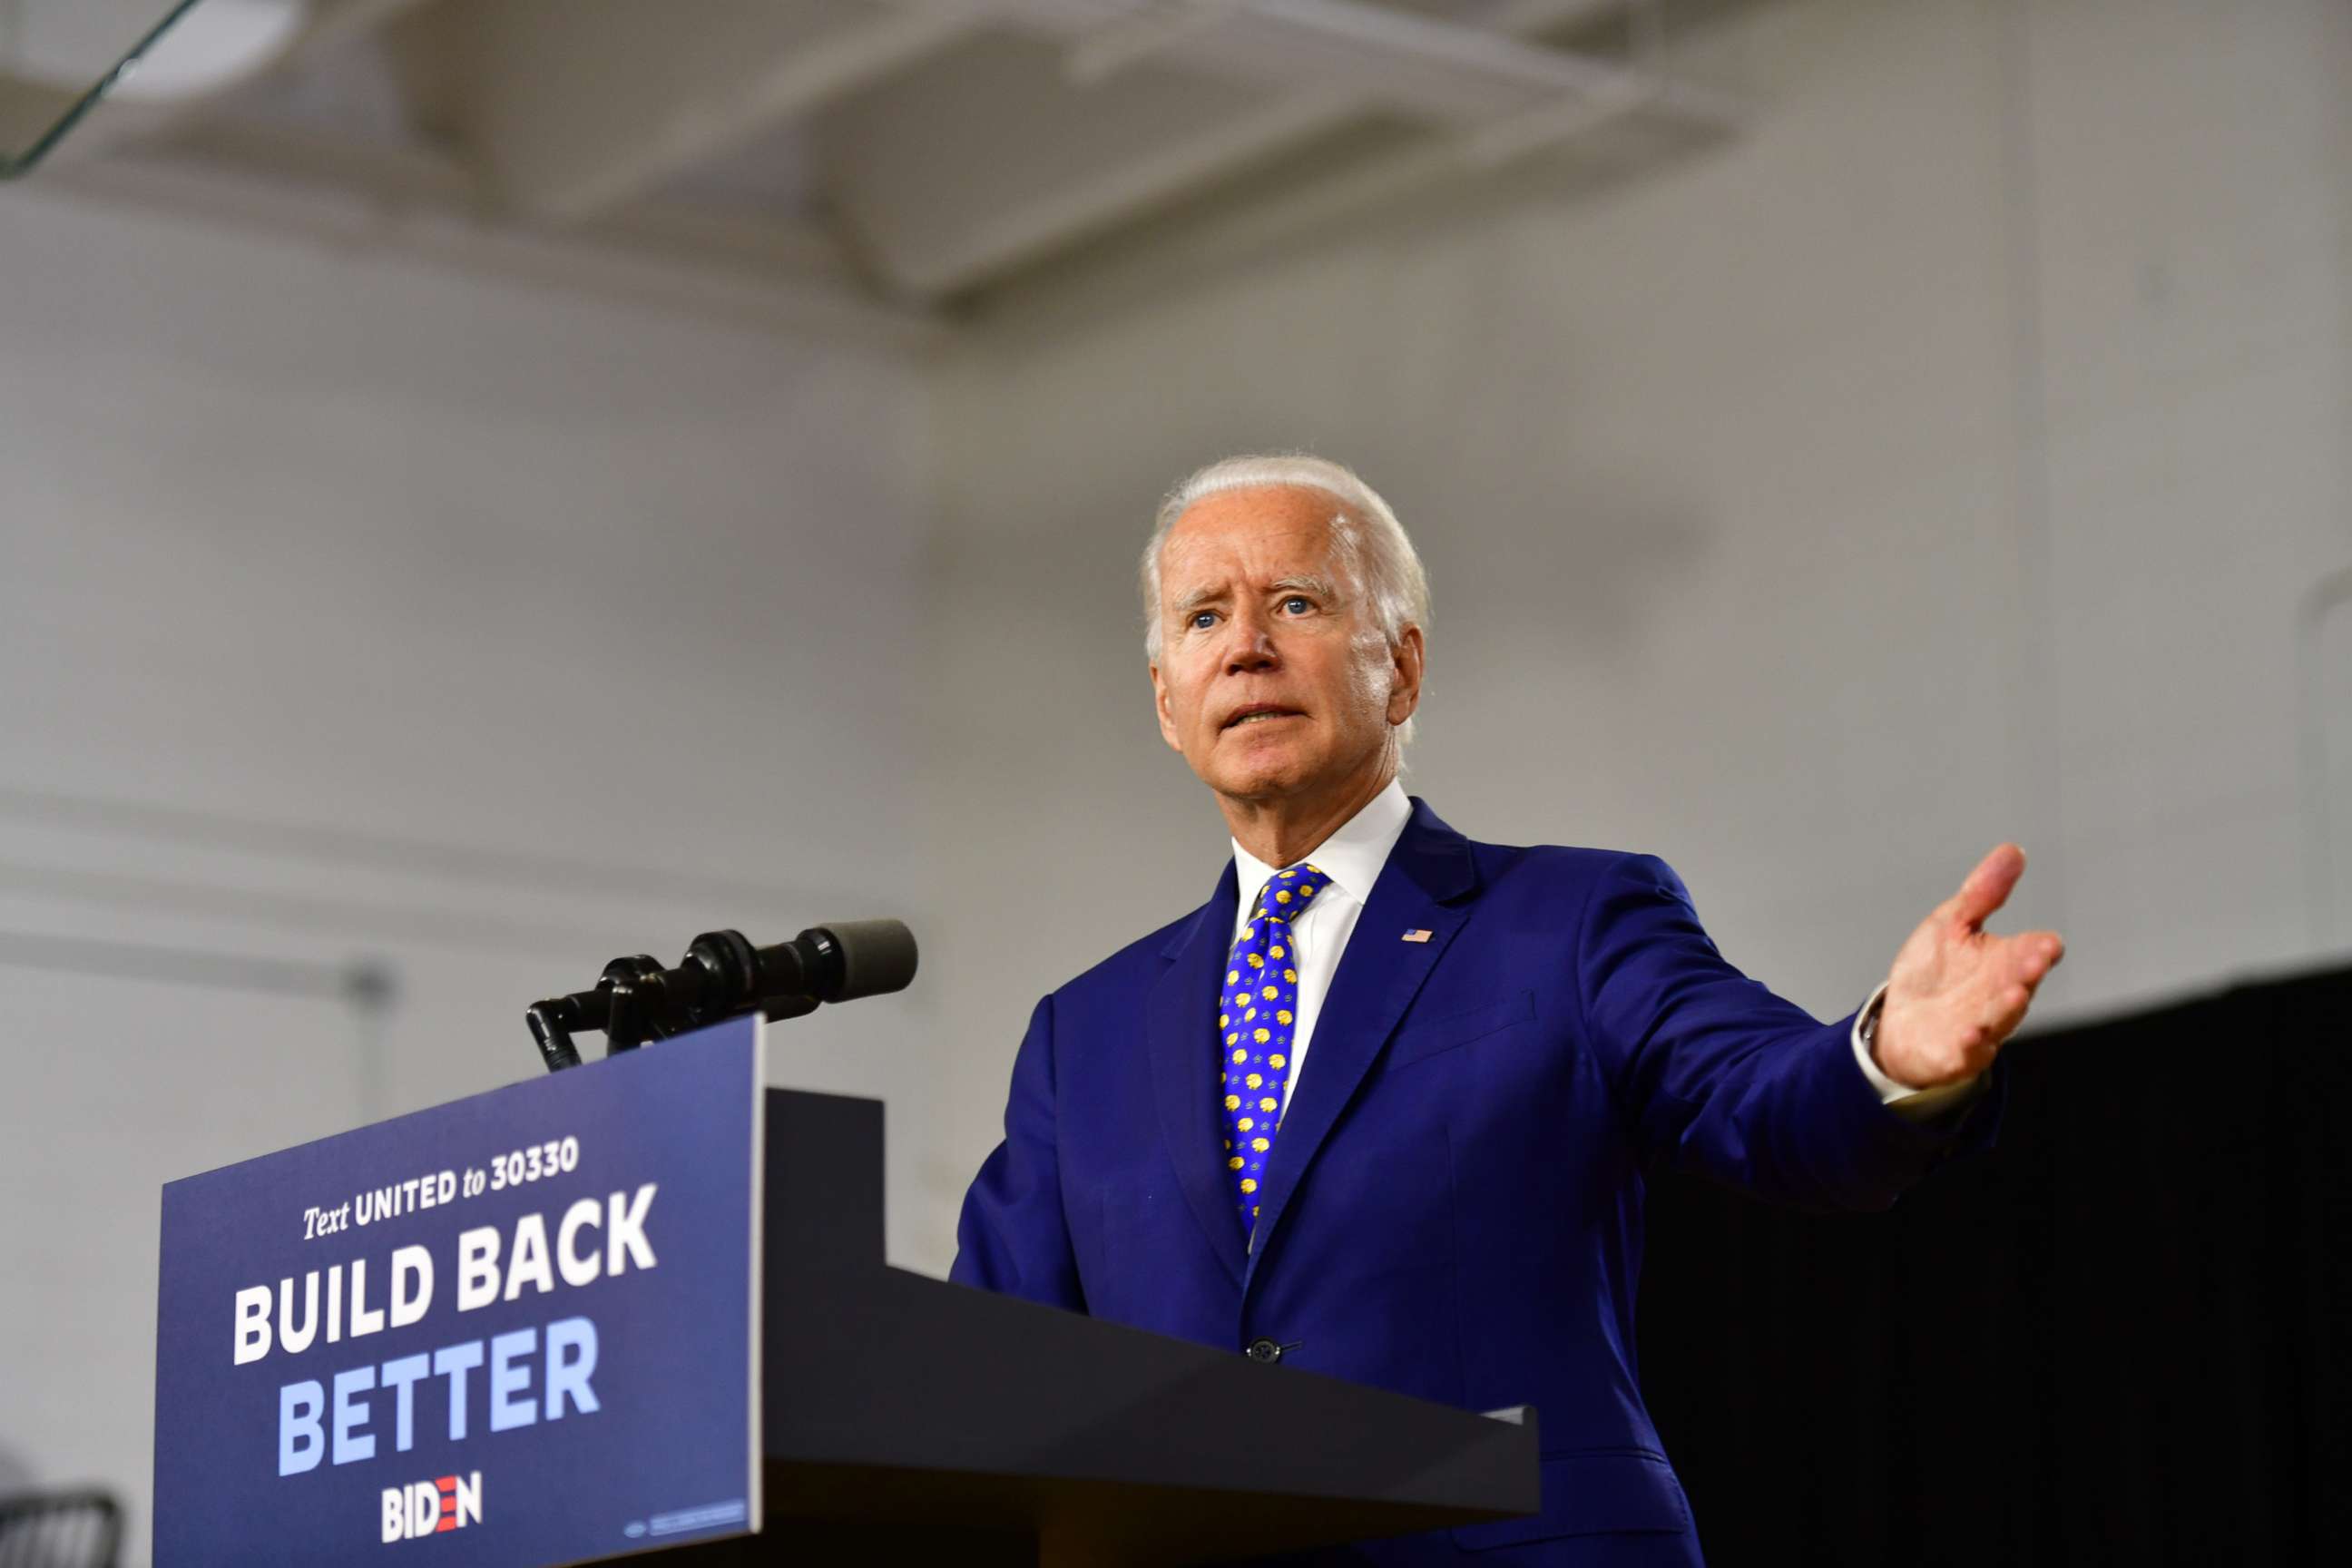 PHOTO: In this July 28, 2020, file photo, presumptive Democratic presidential nominee former Vice President Joe Biden delivers a speech at the William Hicks Anderson Community Center in Wilmington, Delaware. 